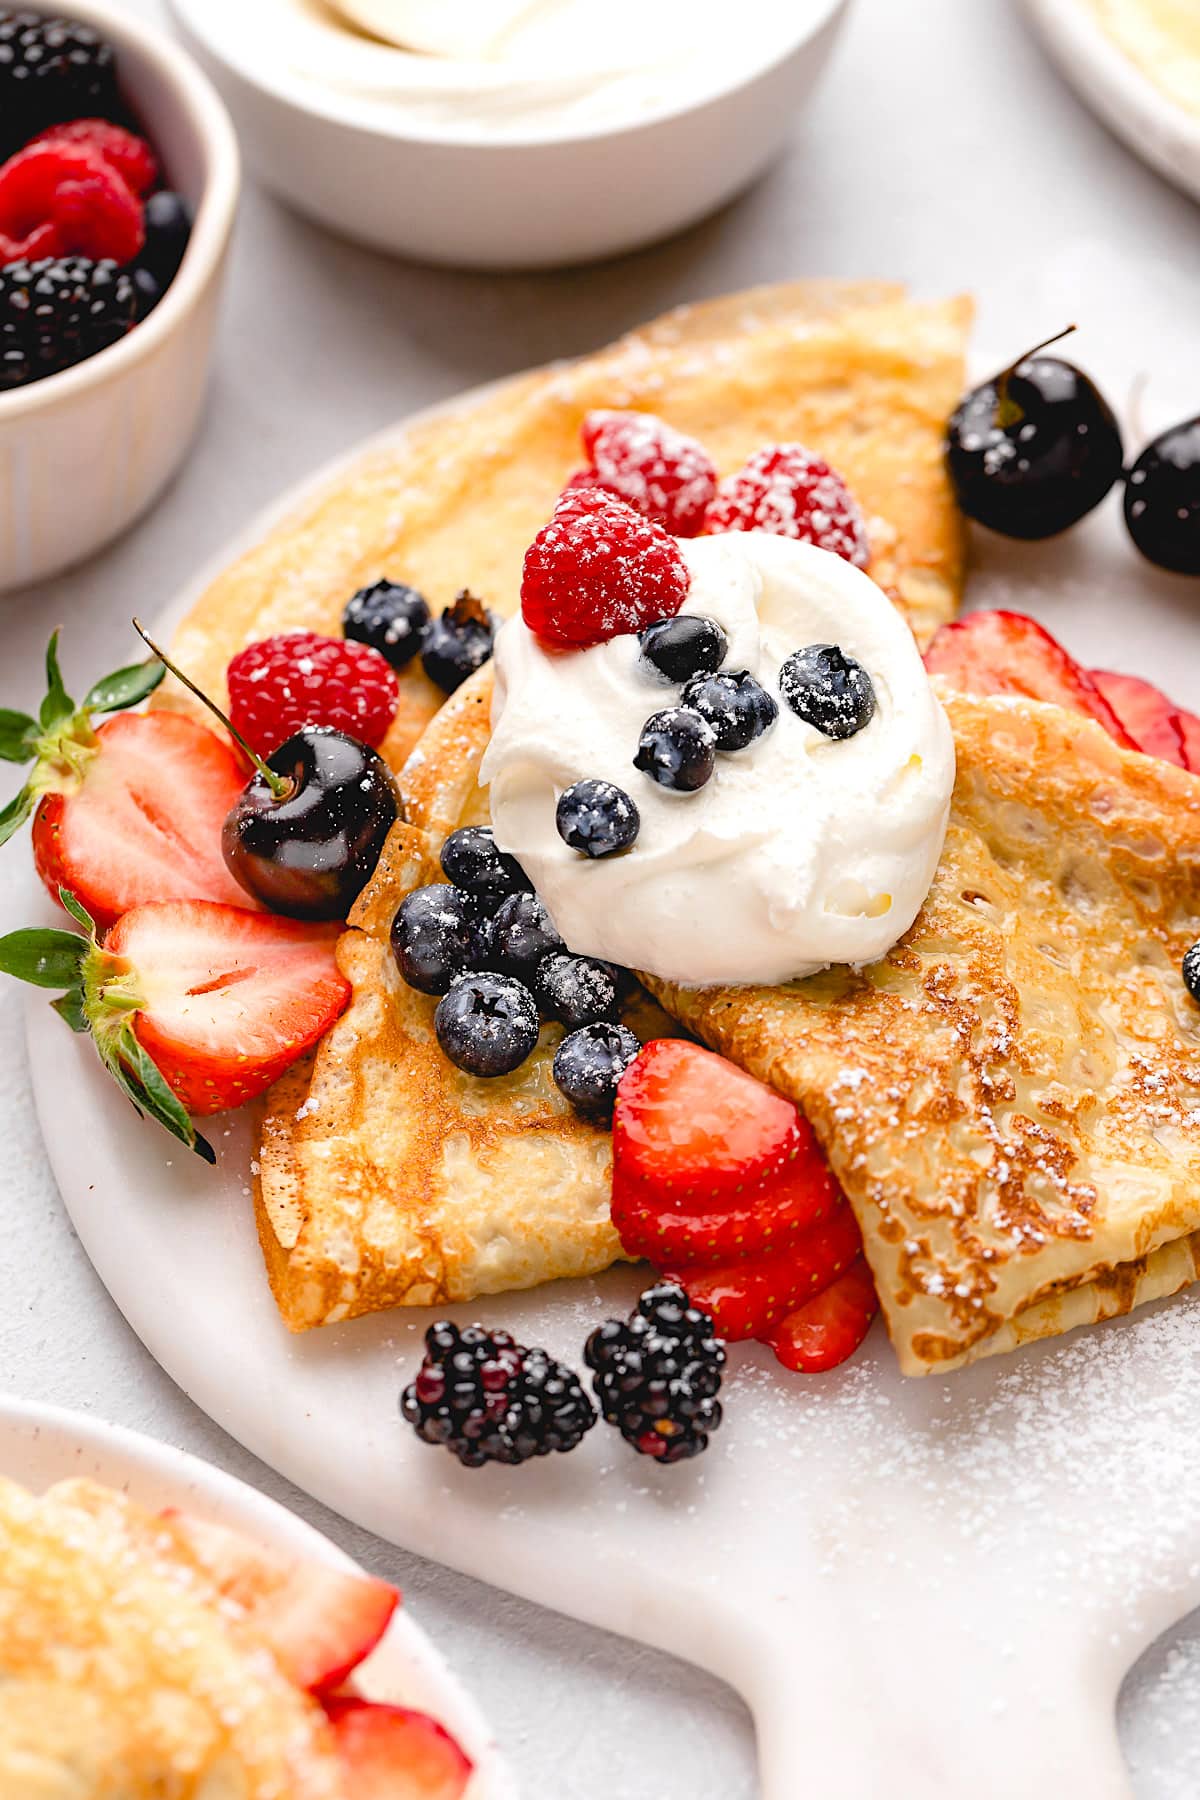 crepes on plate with whipped cream, berries, and powdered sugar.